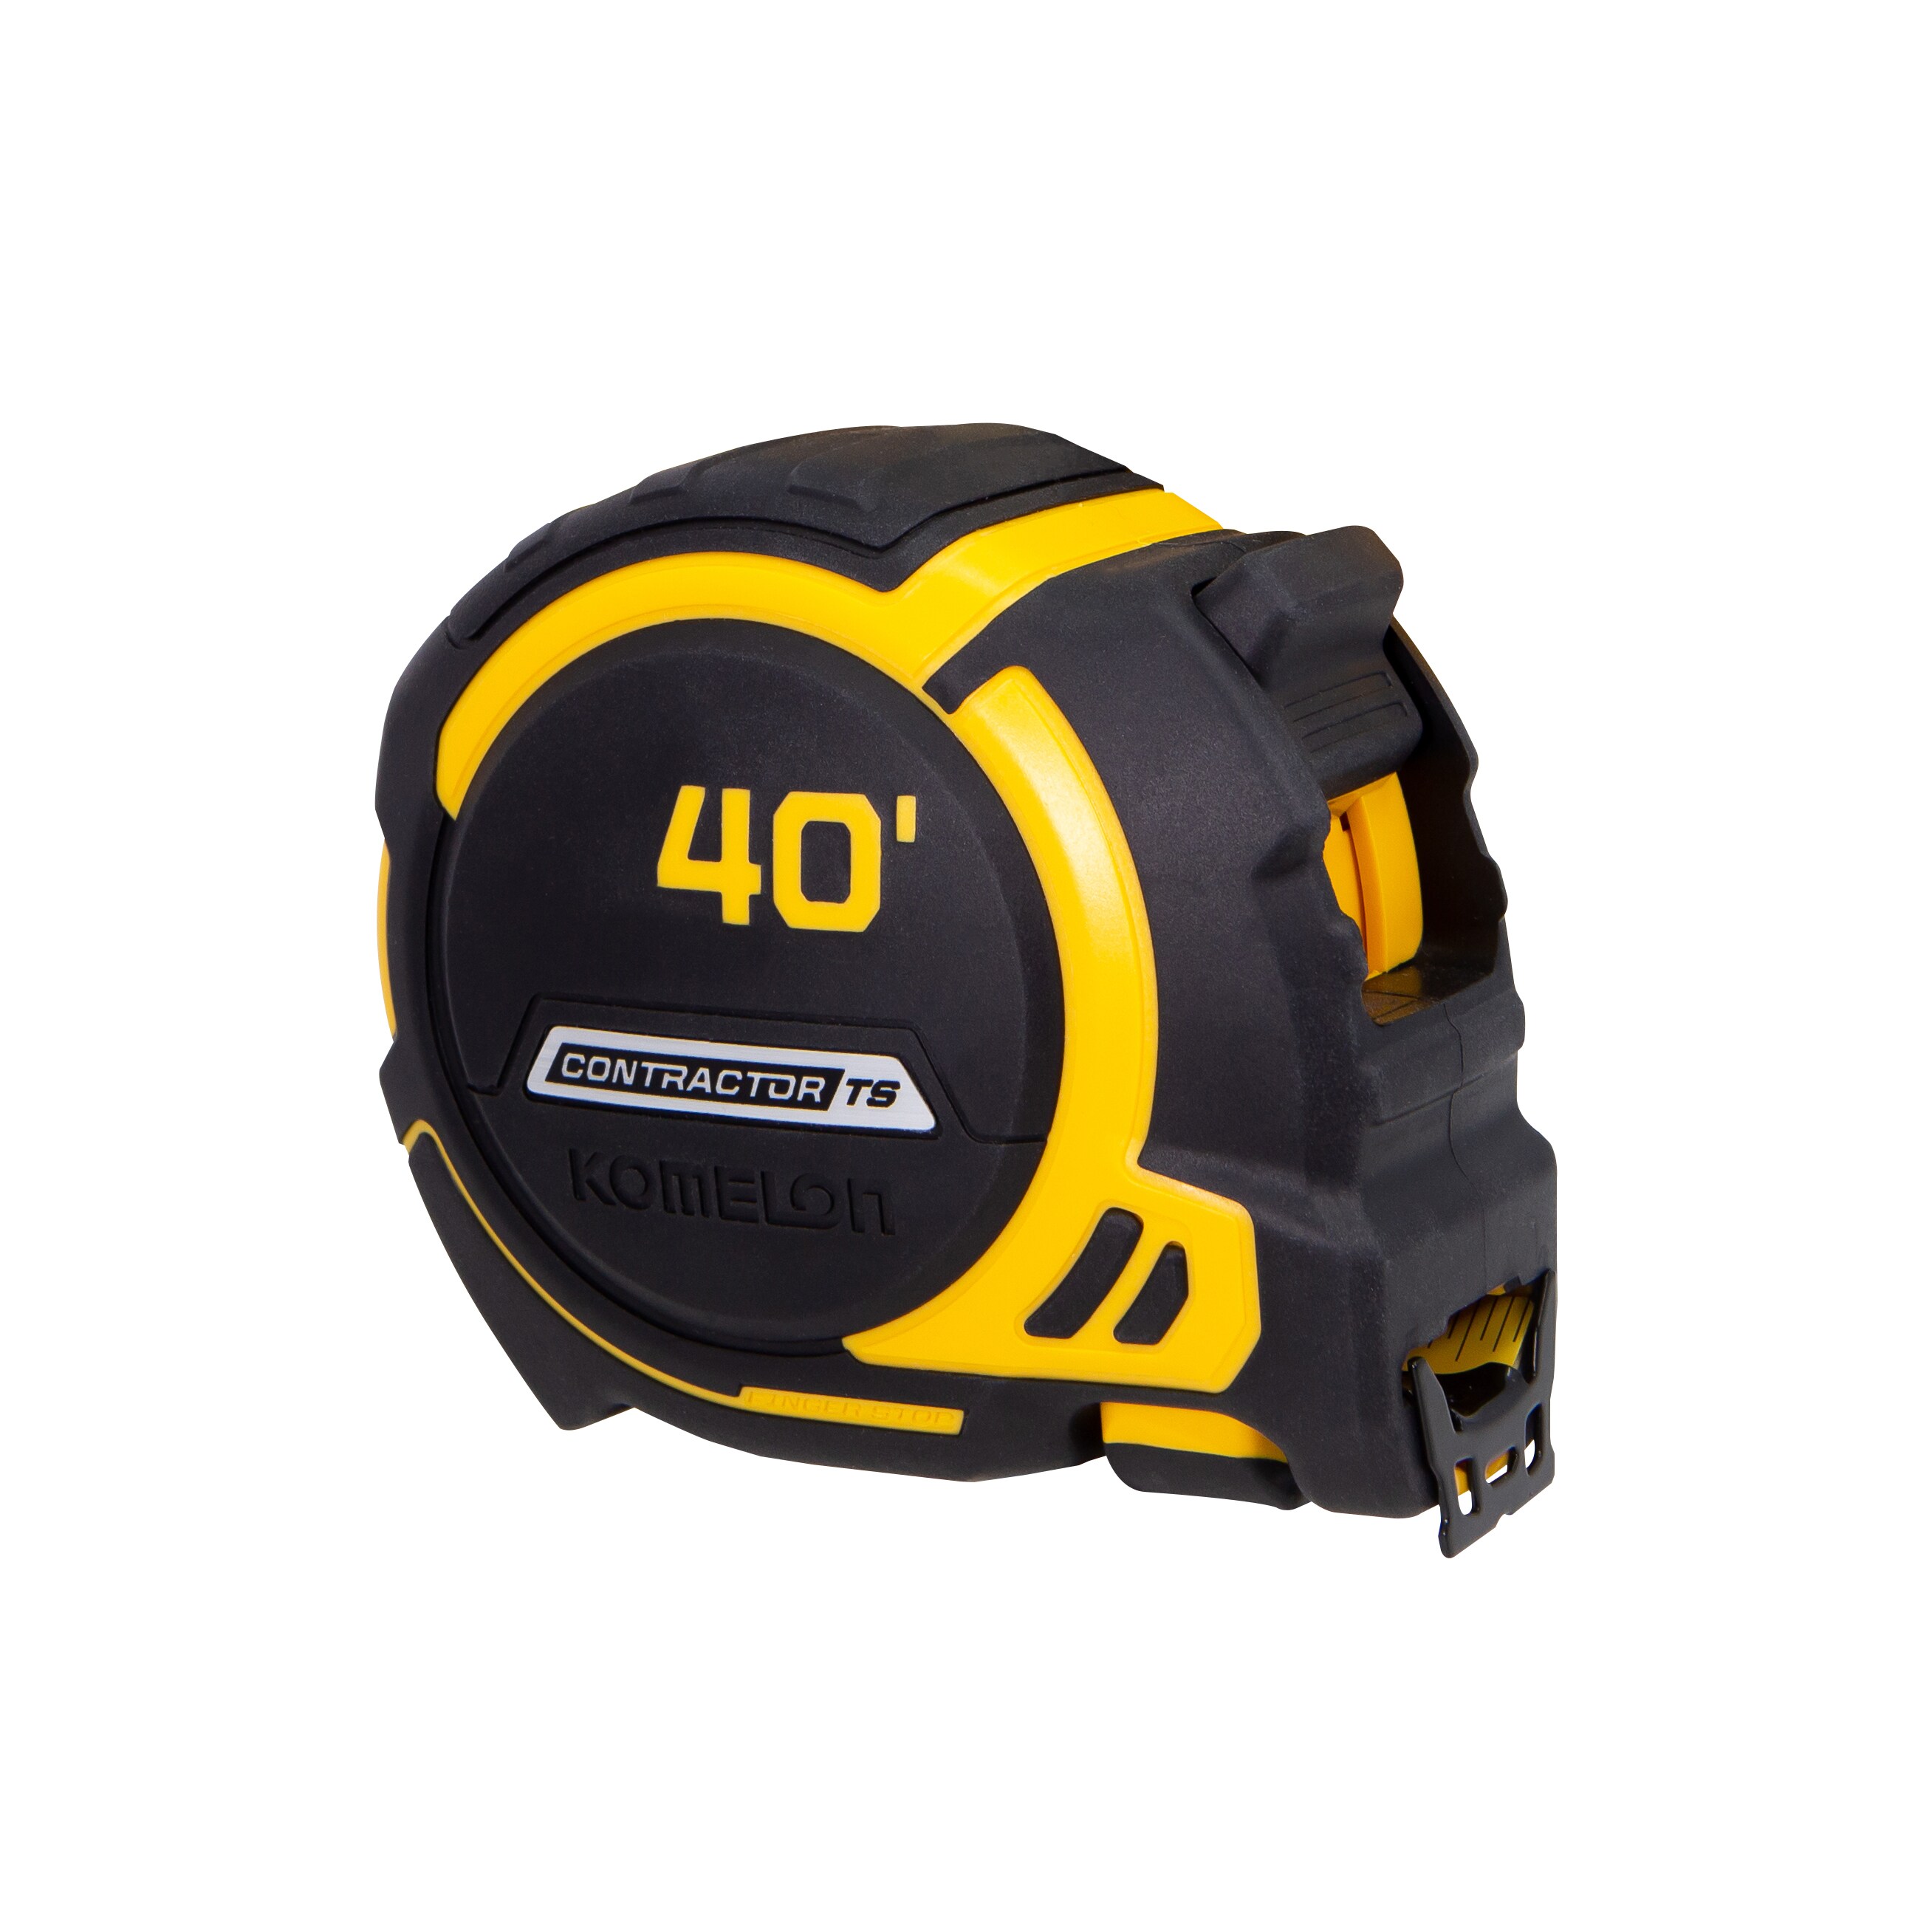 Komelon Contractor TS 40-ft Tape Measure in the Tape Measures department at